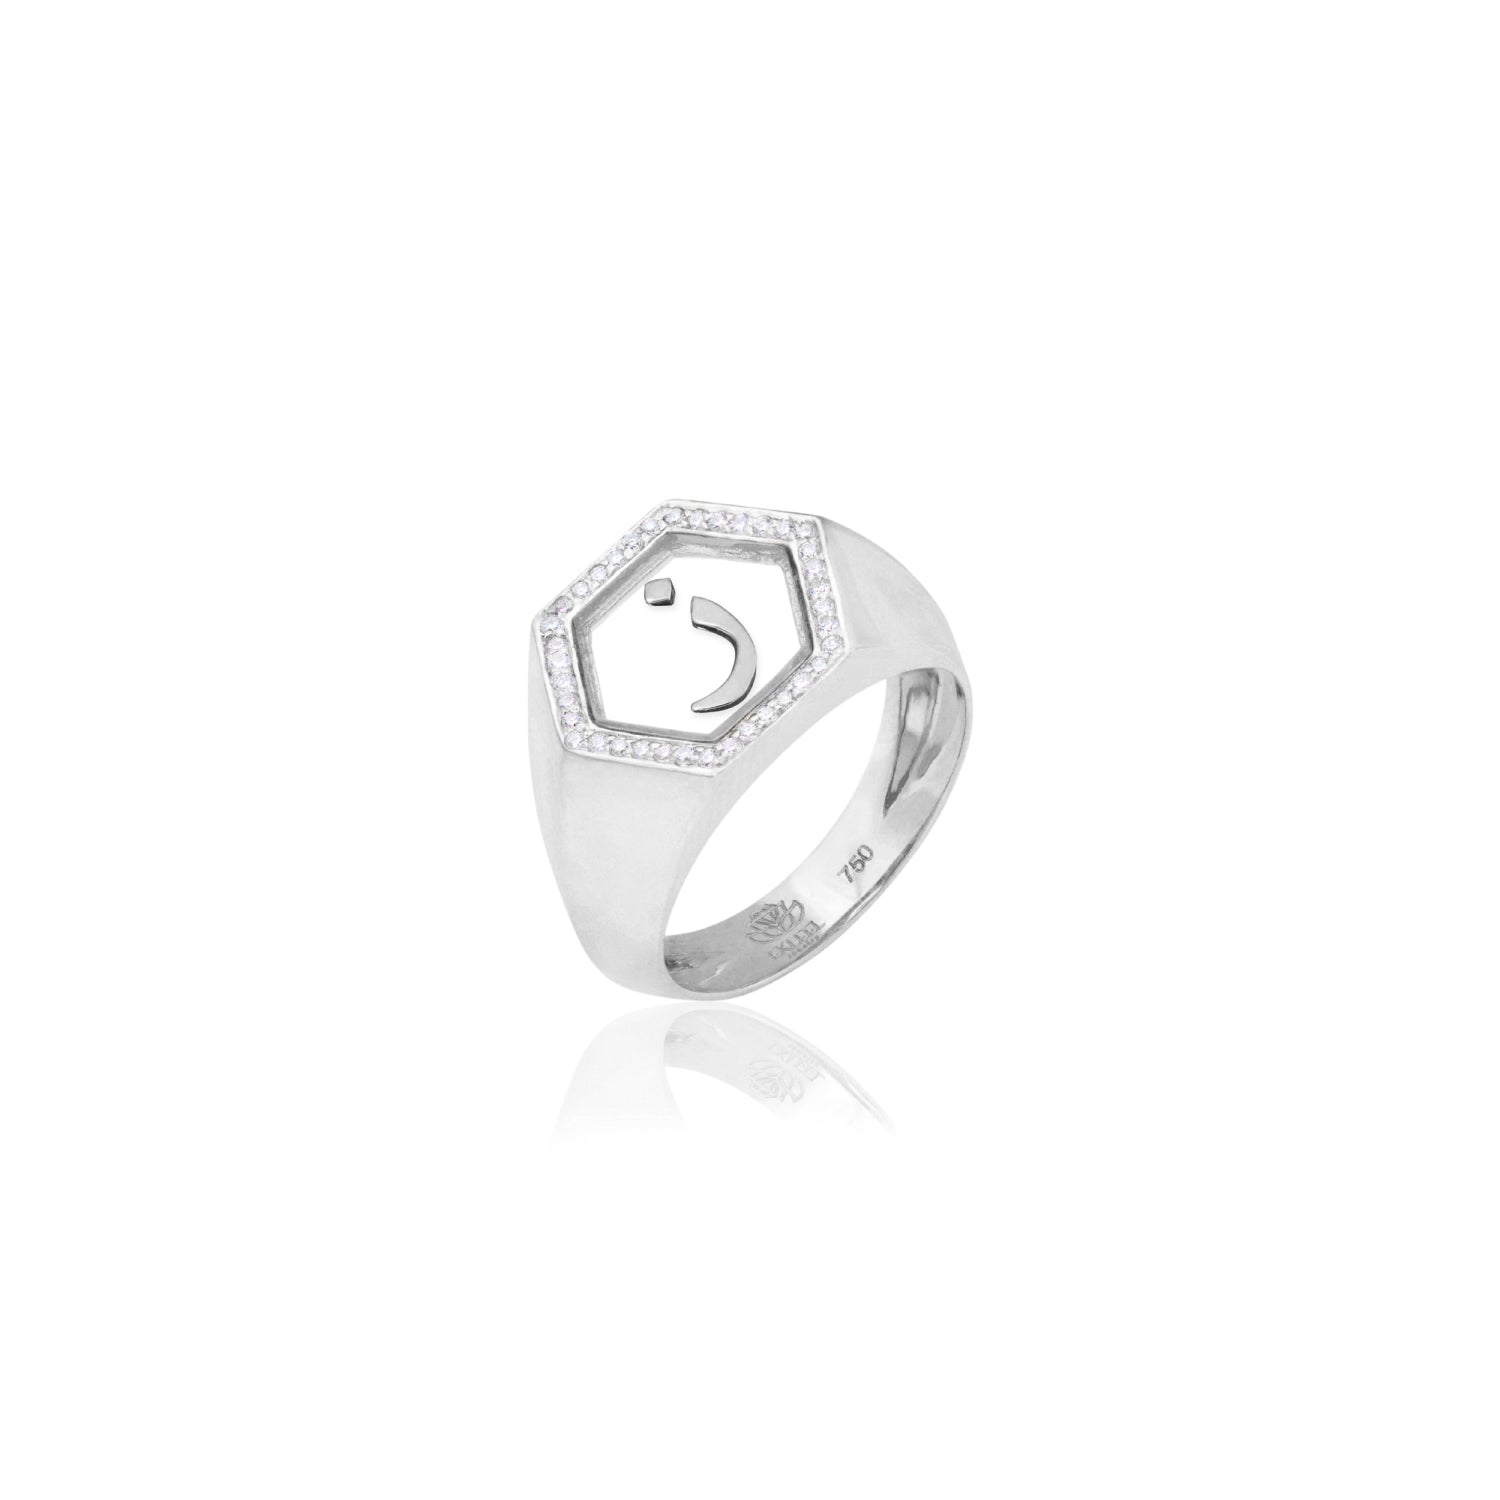 Qamoos 2.0 Letter ز Plexiglass and Diamond Signet Ring in White Gold